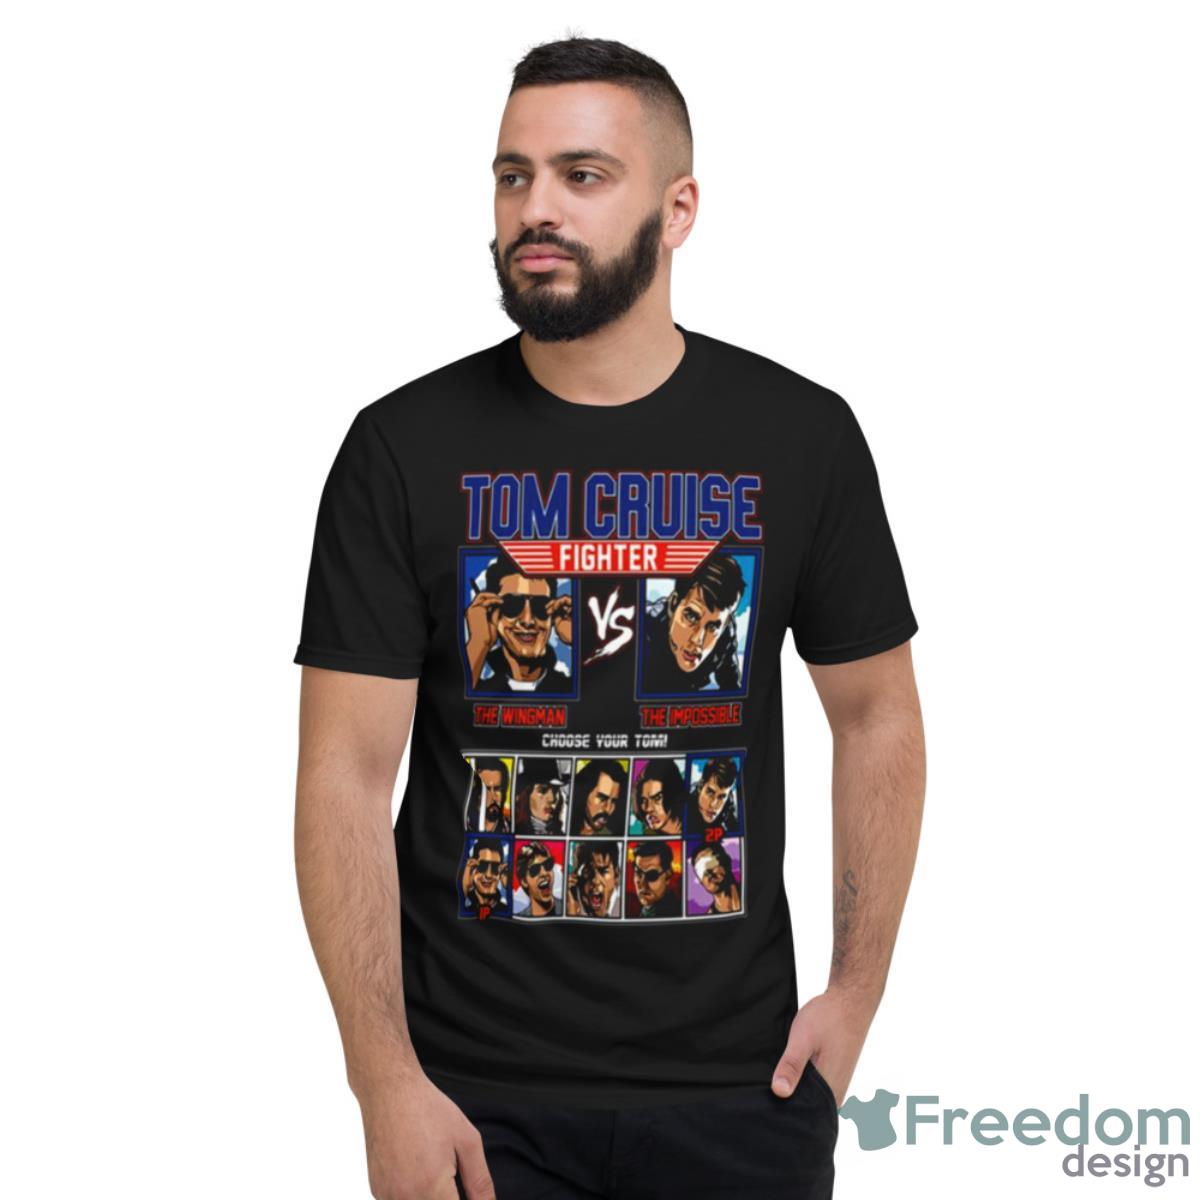 Tom Cruise Fighter Topgun Vs Mission Impossible shirt